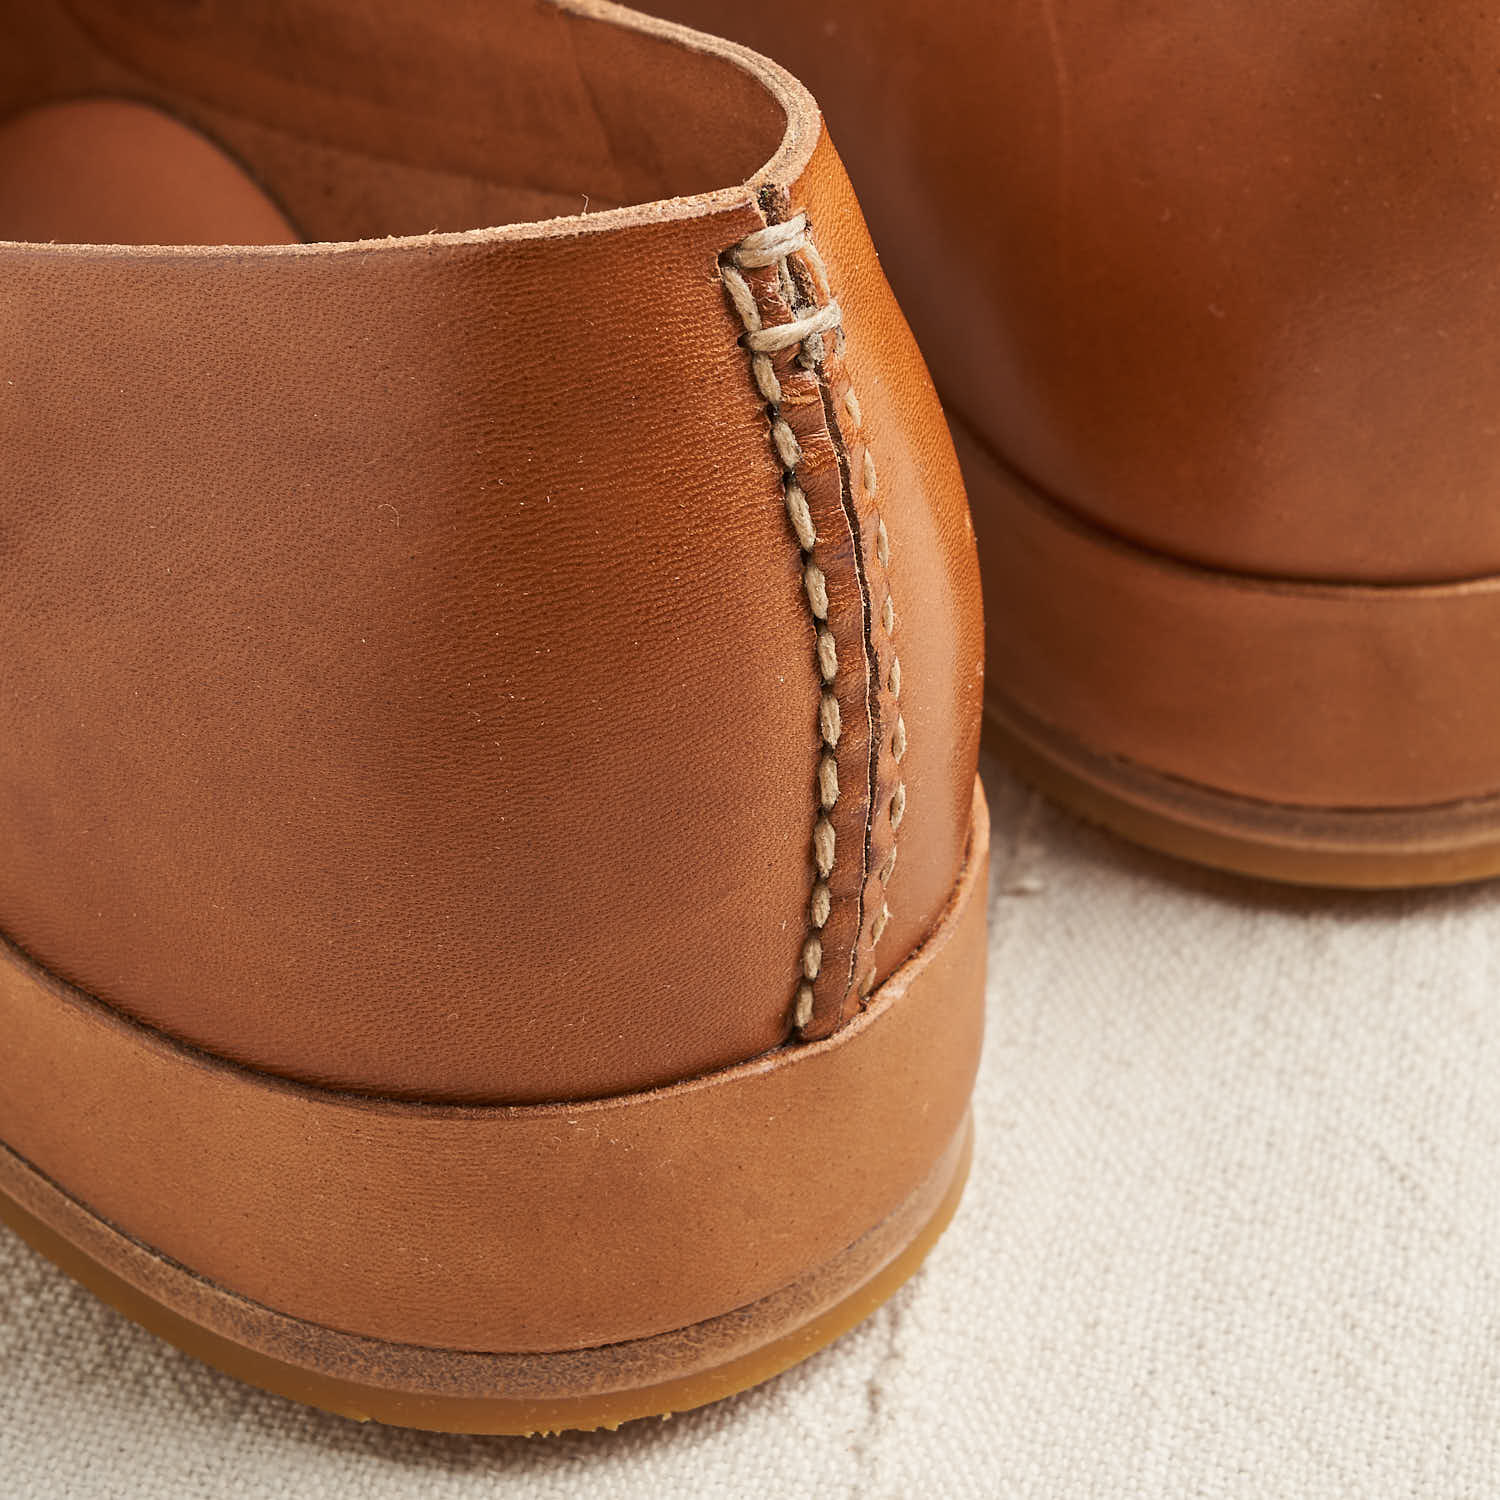 Hand-Sewn Slip-On, Vegetable Tanned Leather